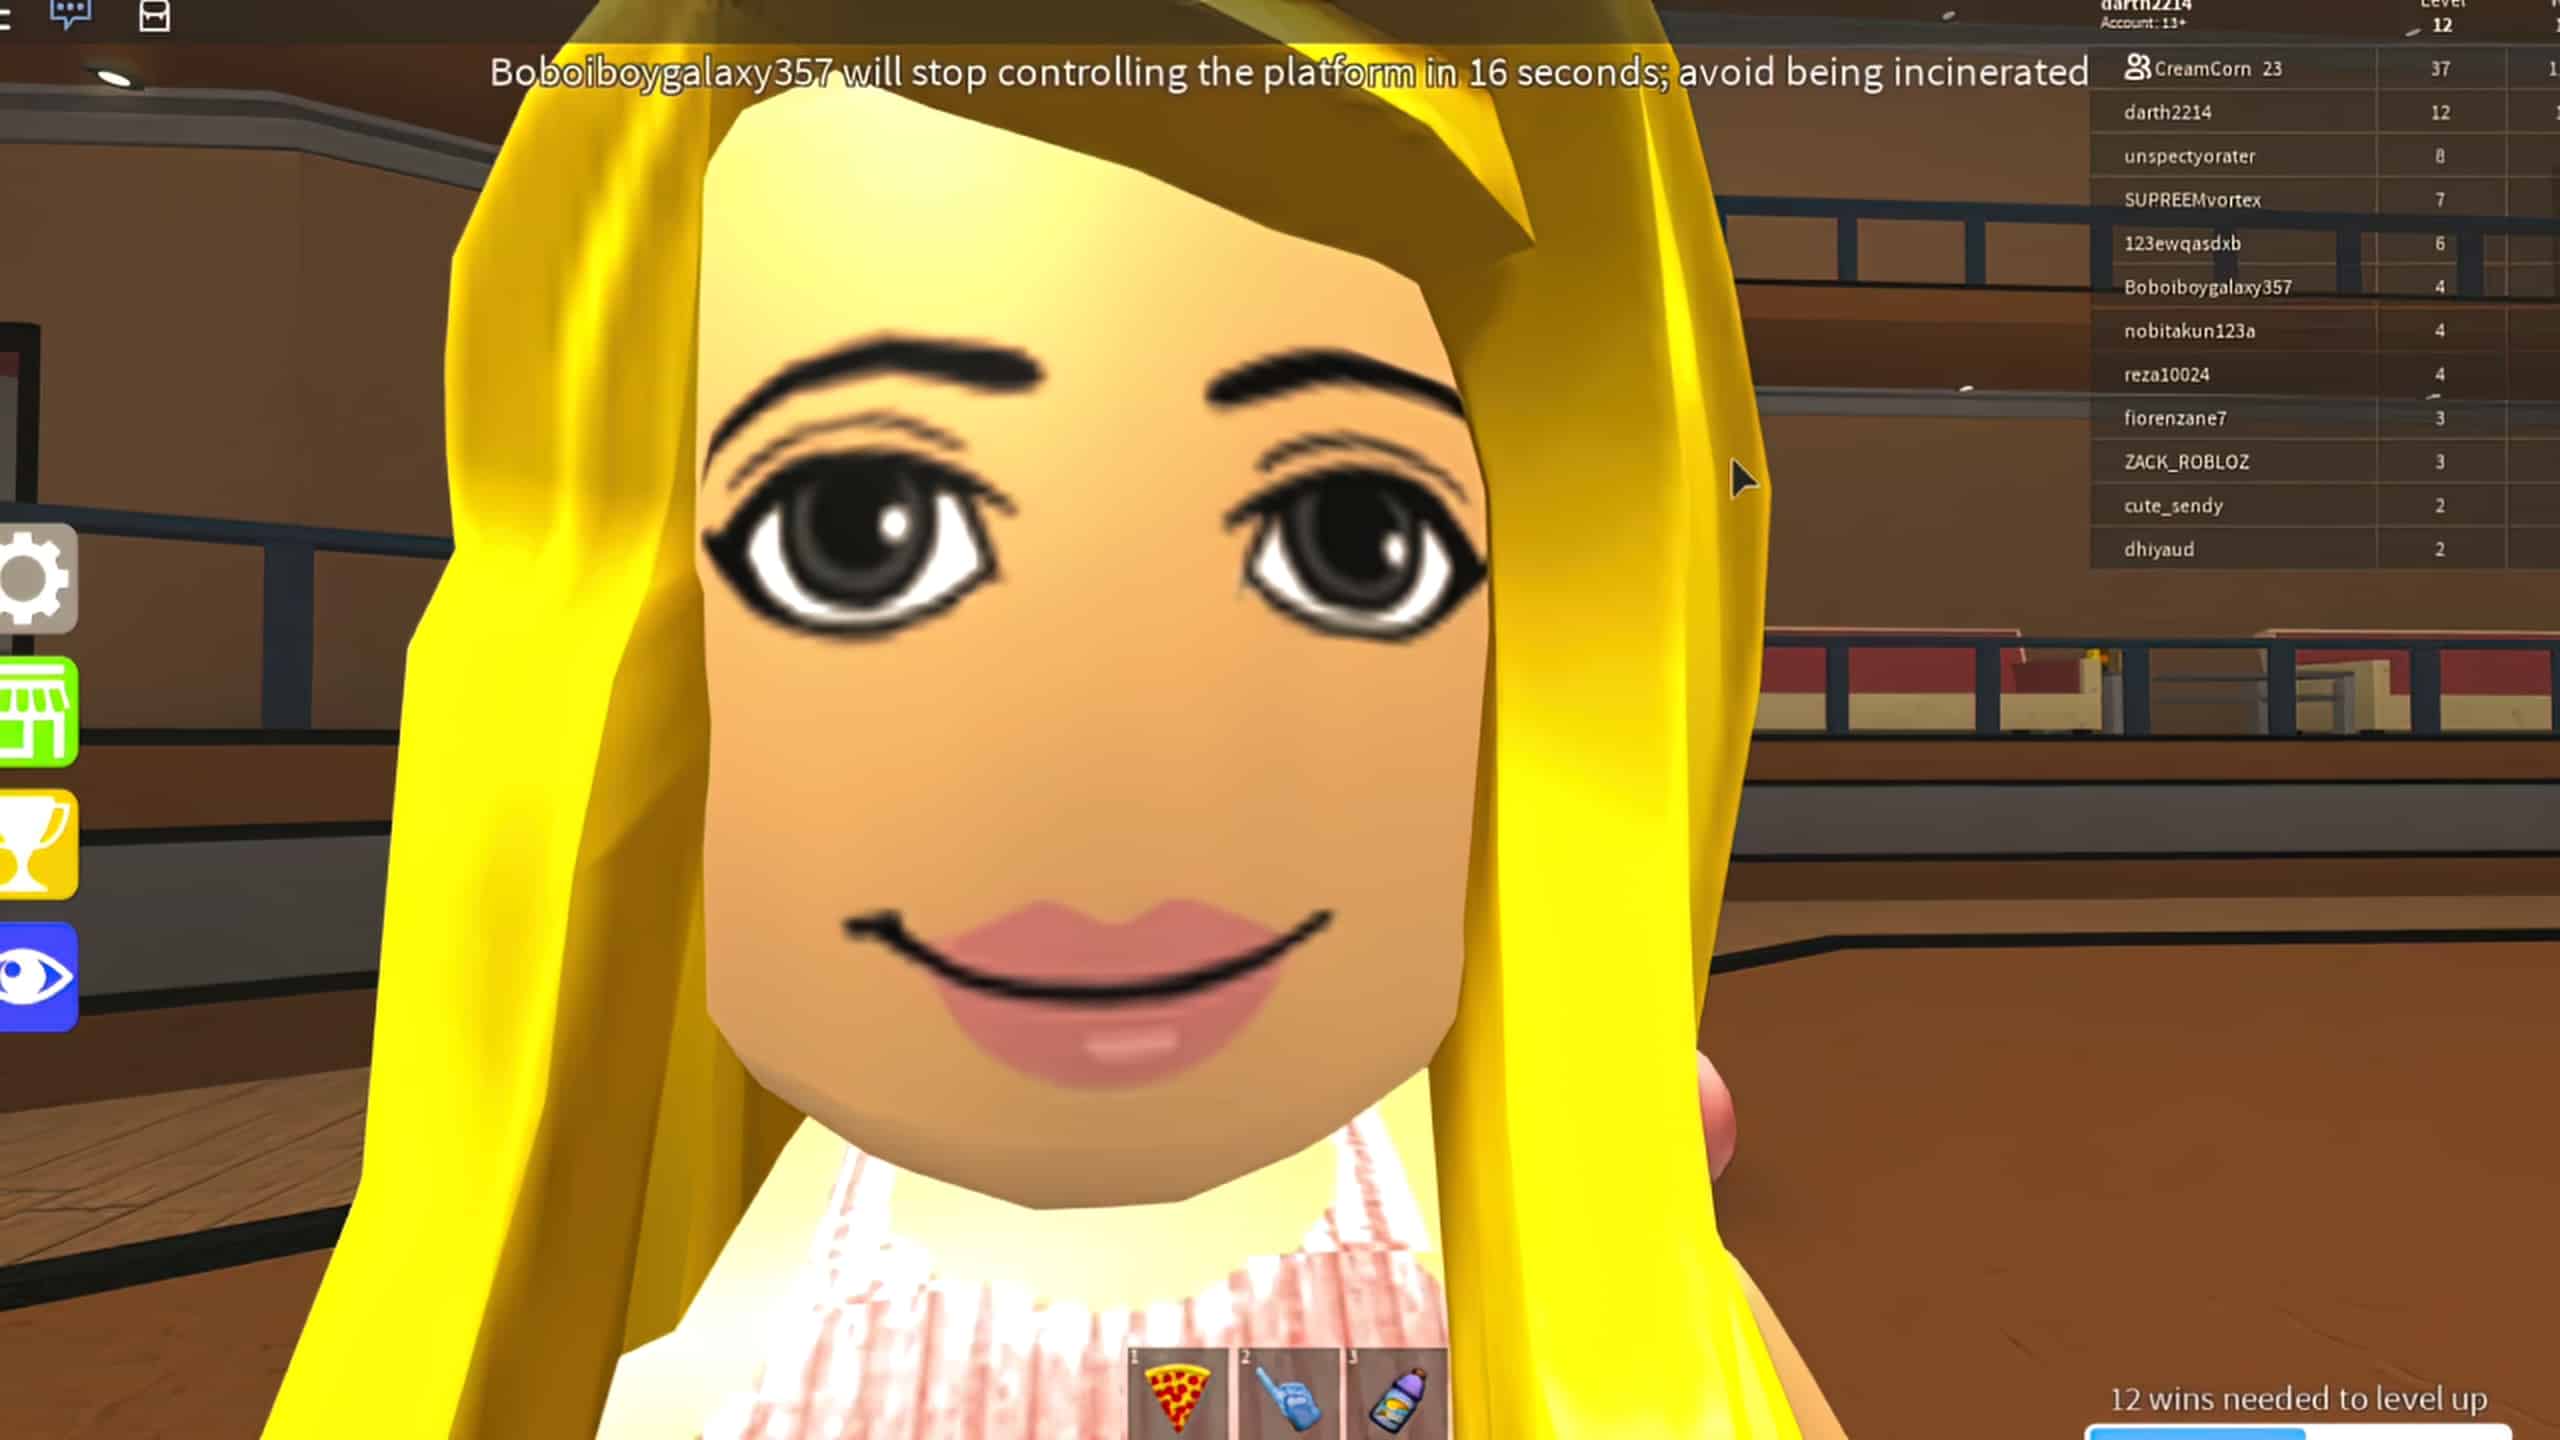 NOOOOOO0000000 'Woman Face By Roblox This item is not currently